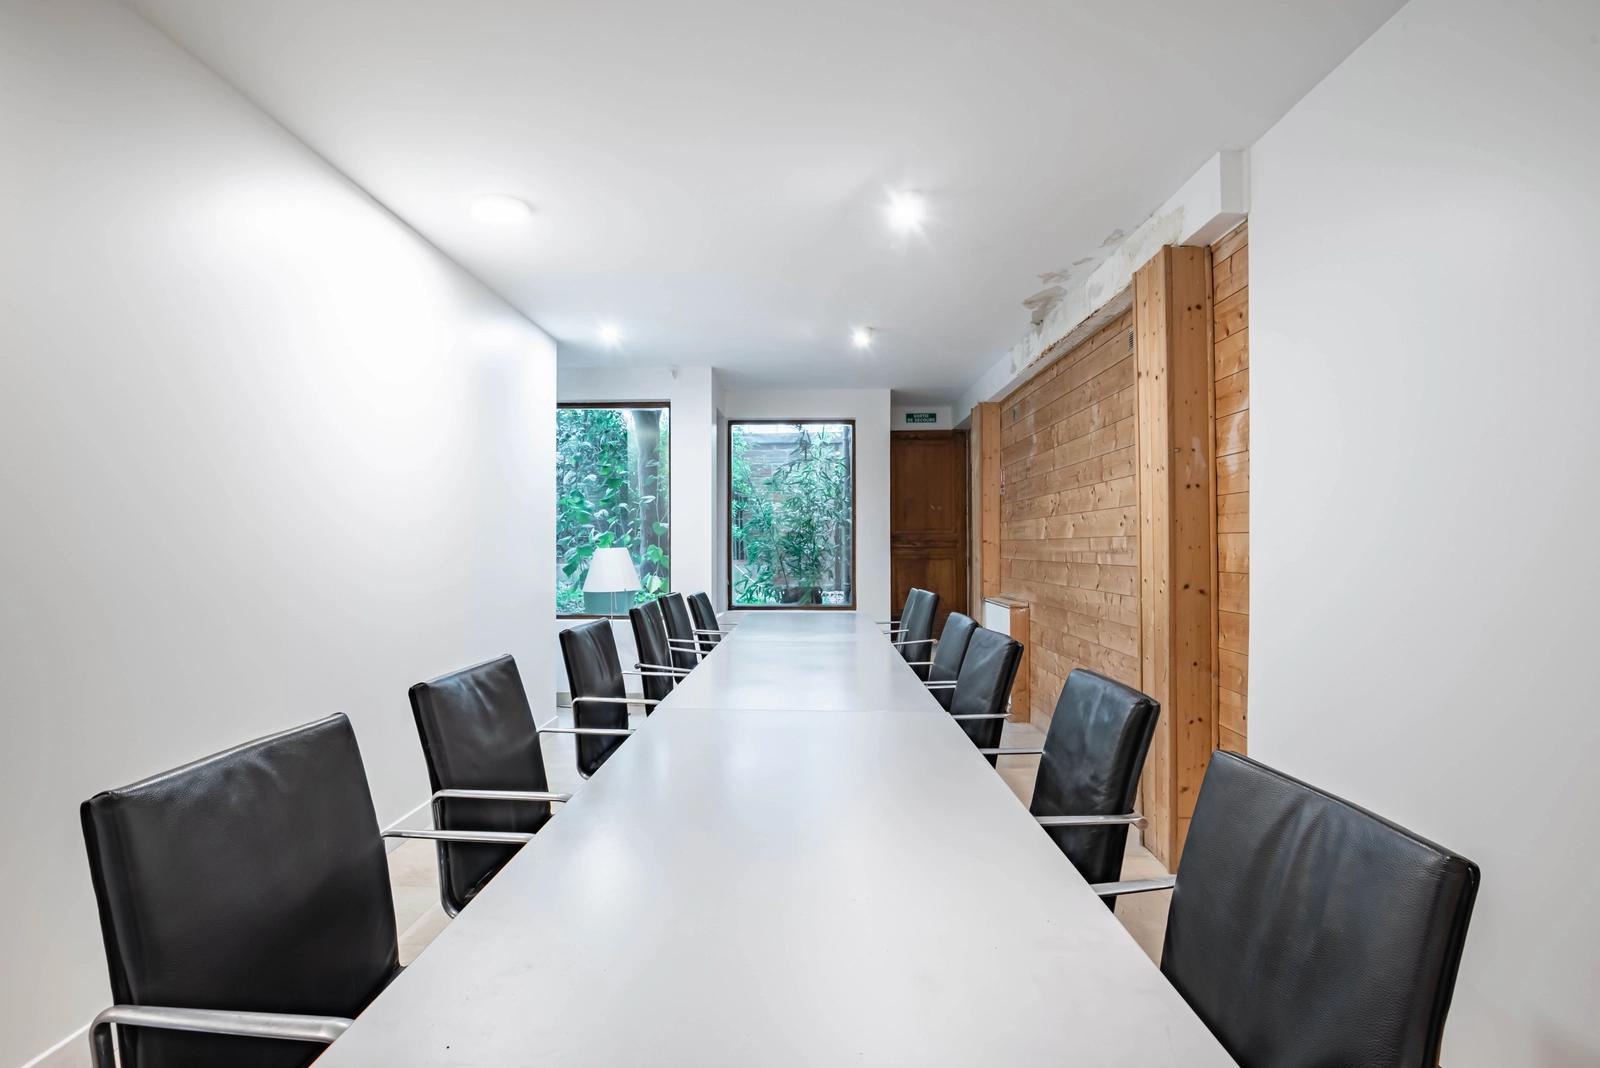 Meeting room in Millstone house with garden - 3